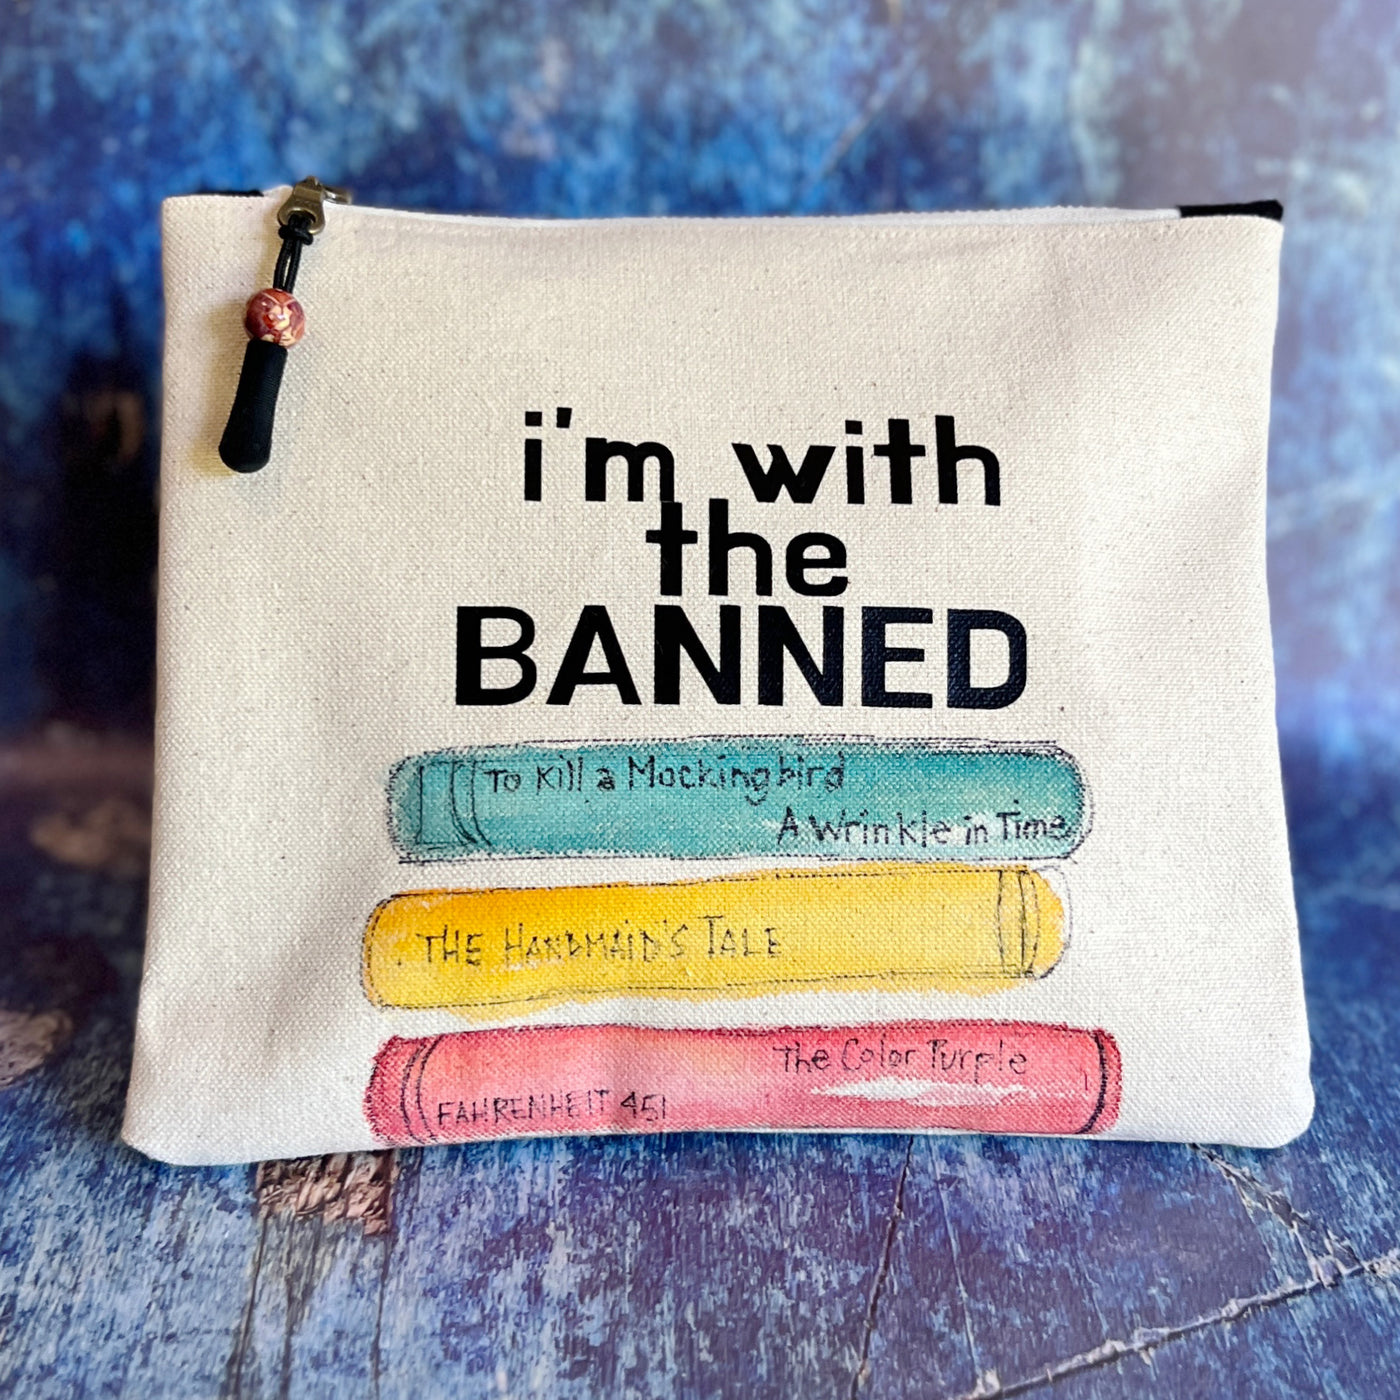 mini canvas zip bag pouch - I'm with the Banned